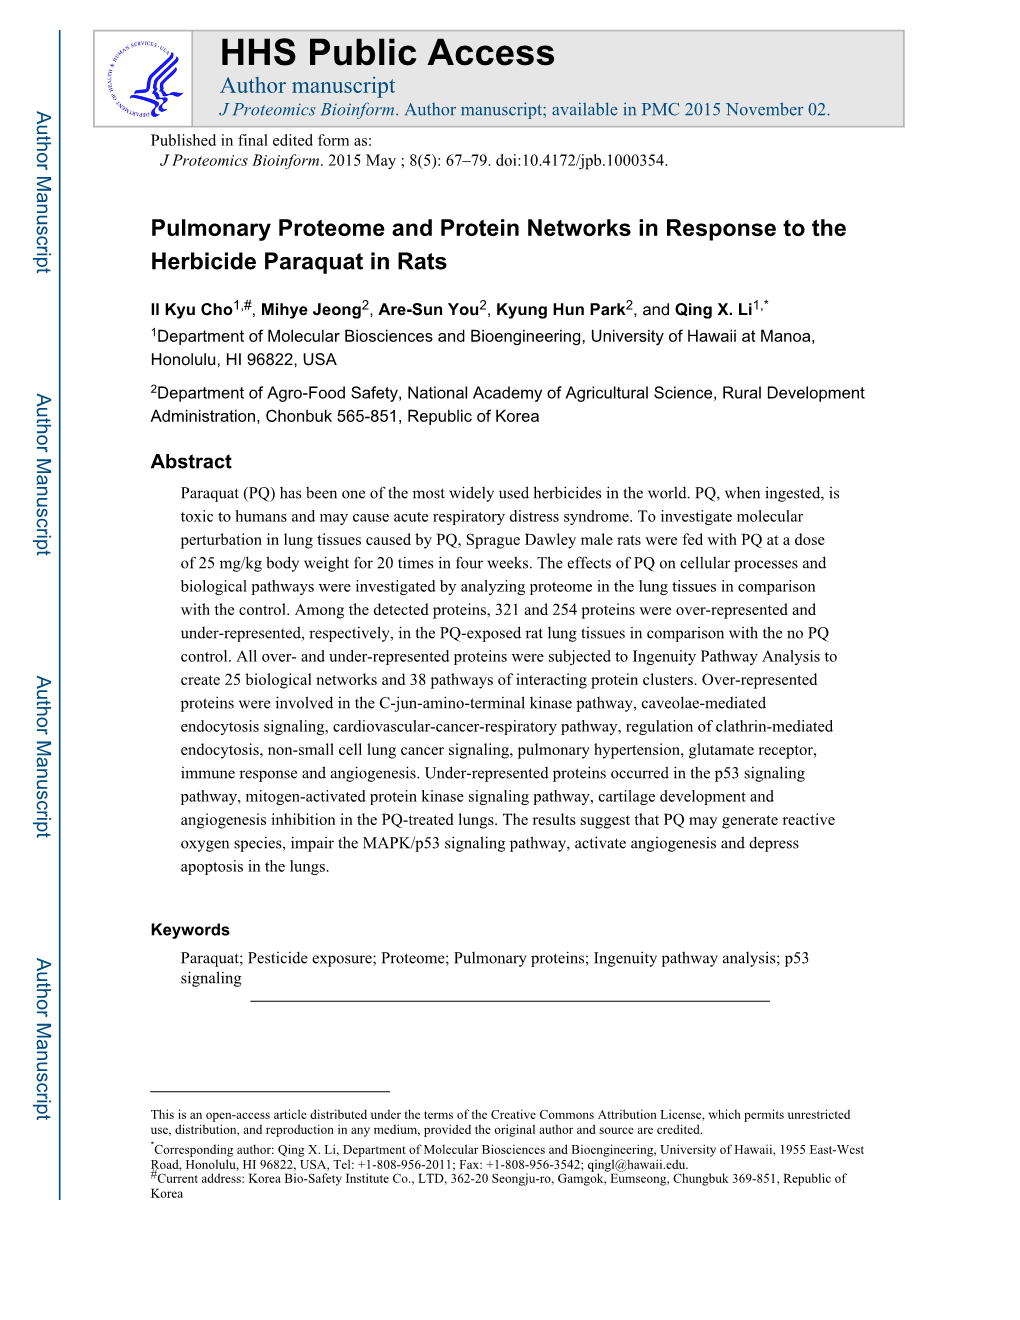 Pulmonary Proteome and Protein Networks in Response to the Herbicide Paraquat in Rats